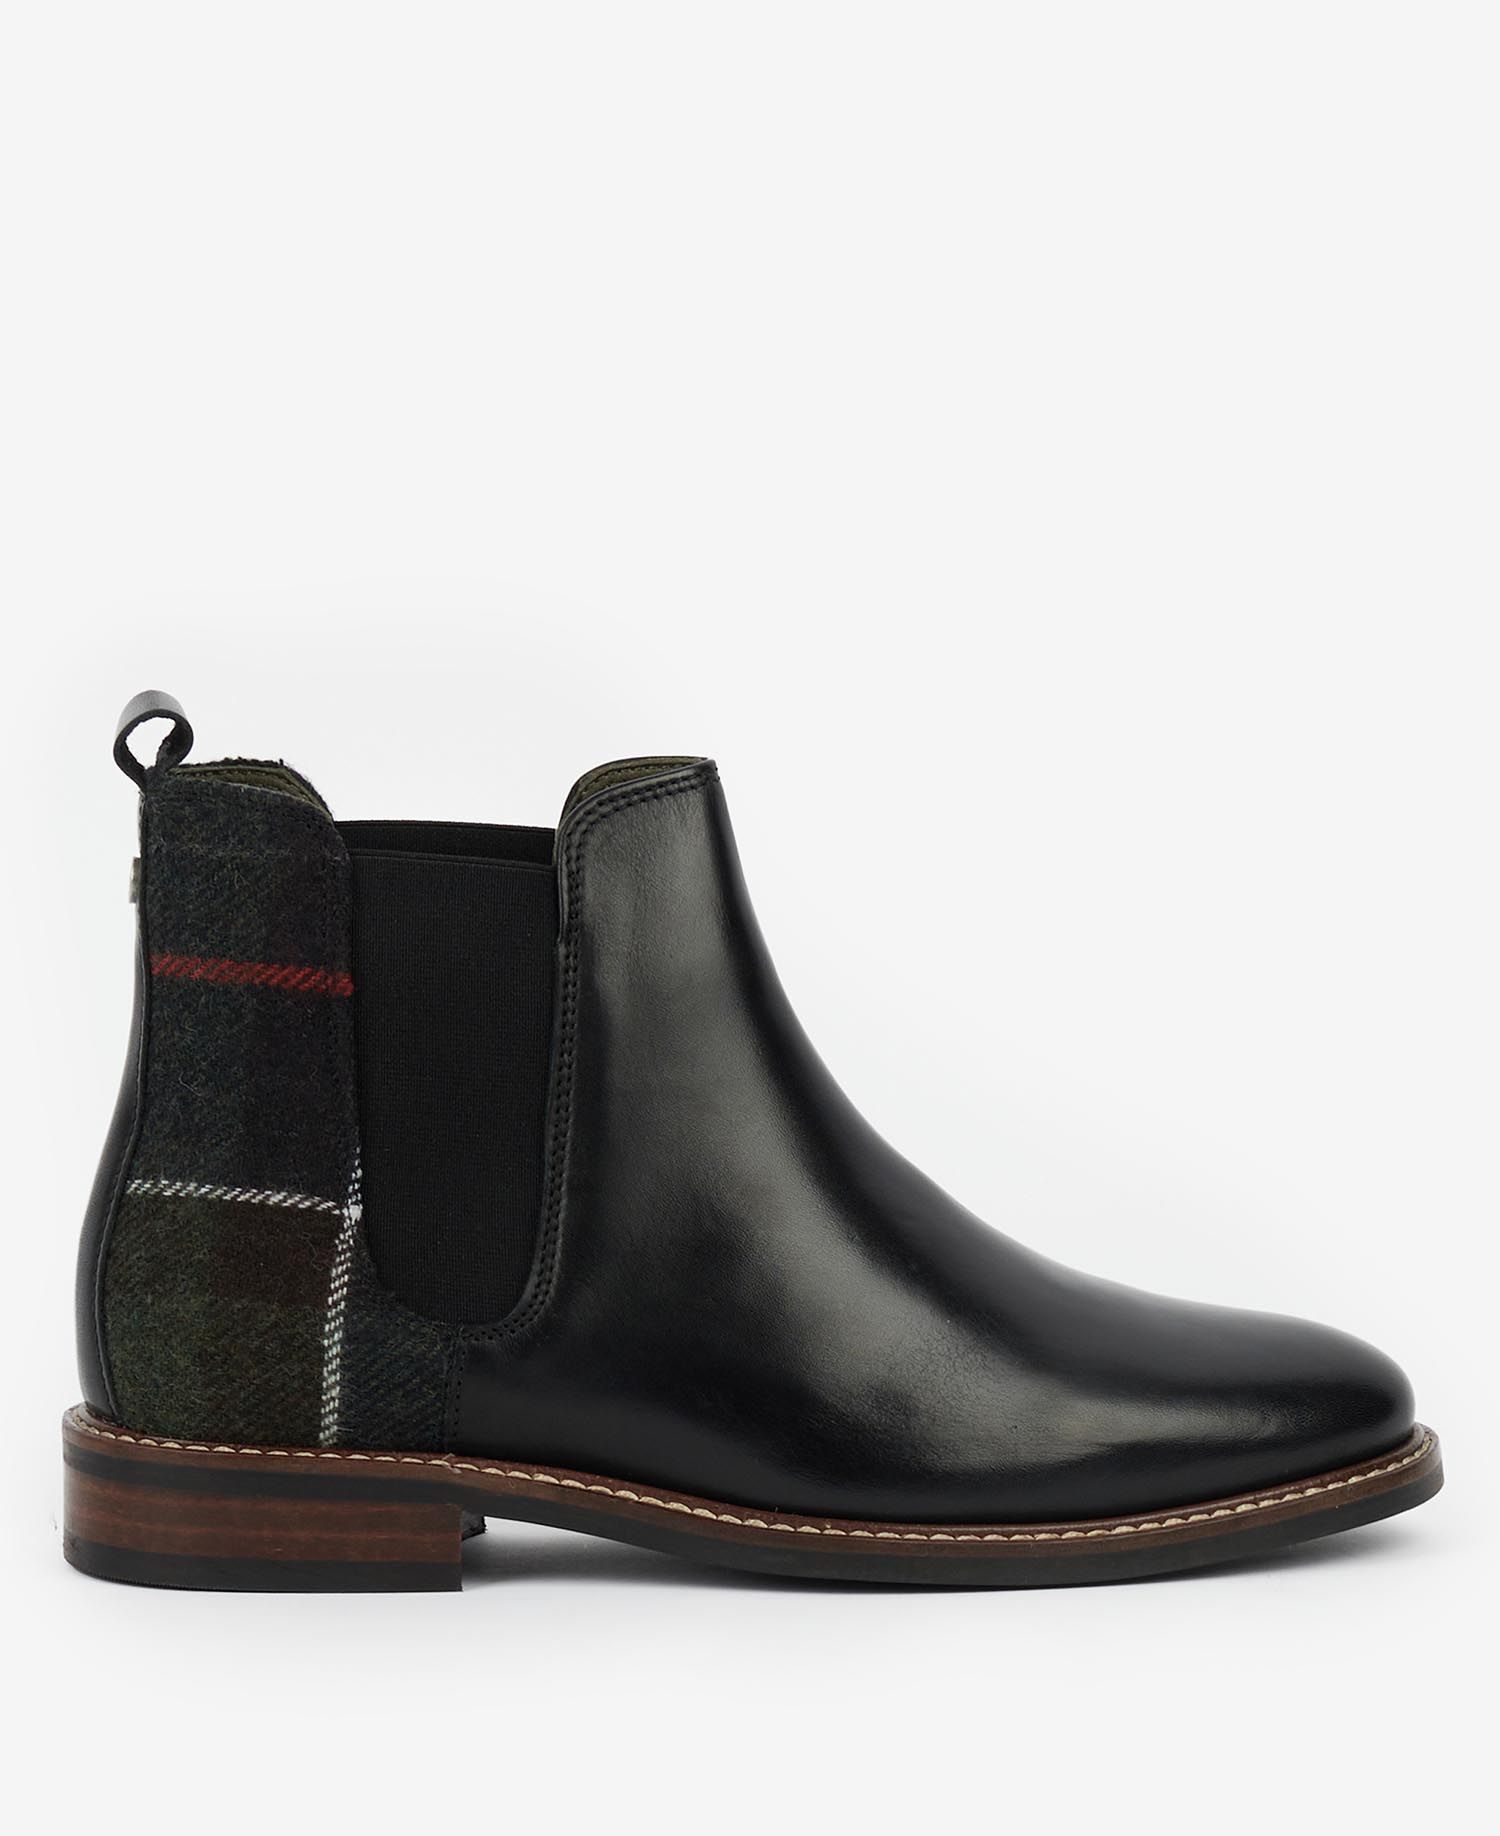 Barbour Sloane Boots